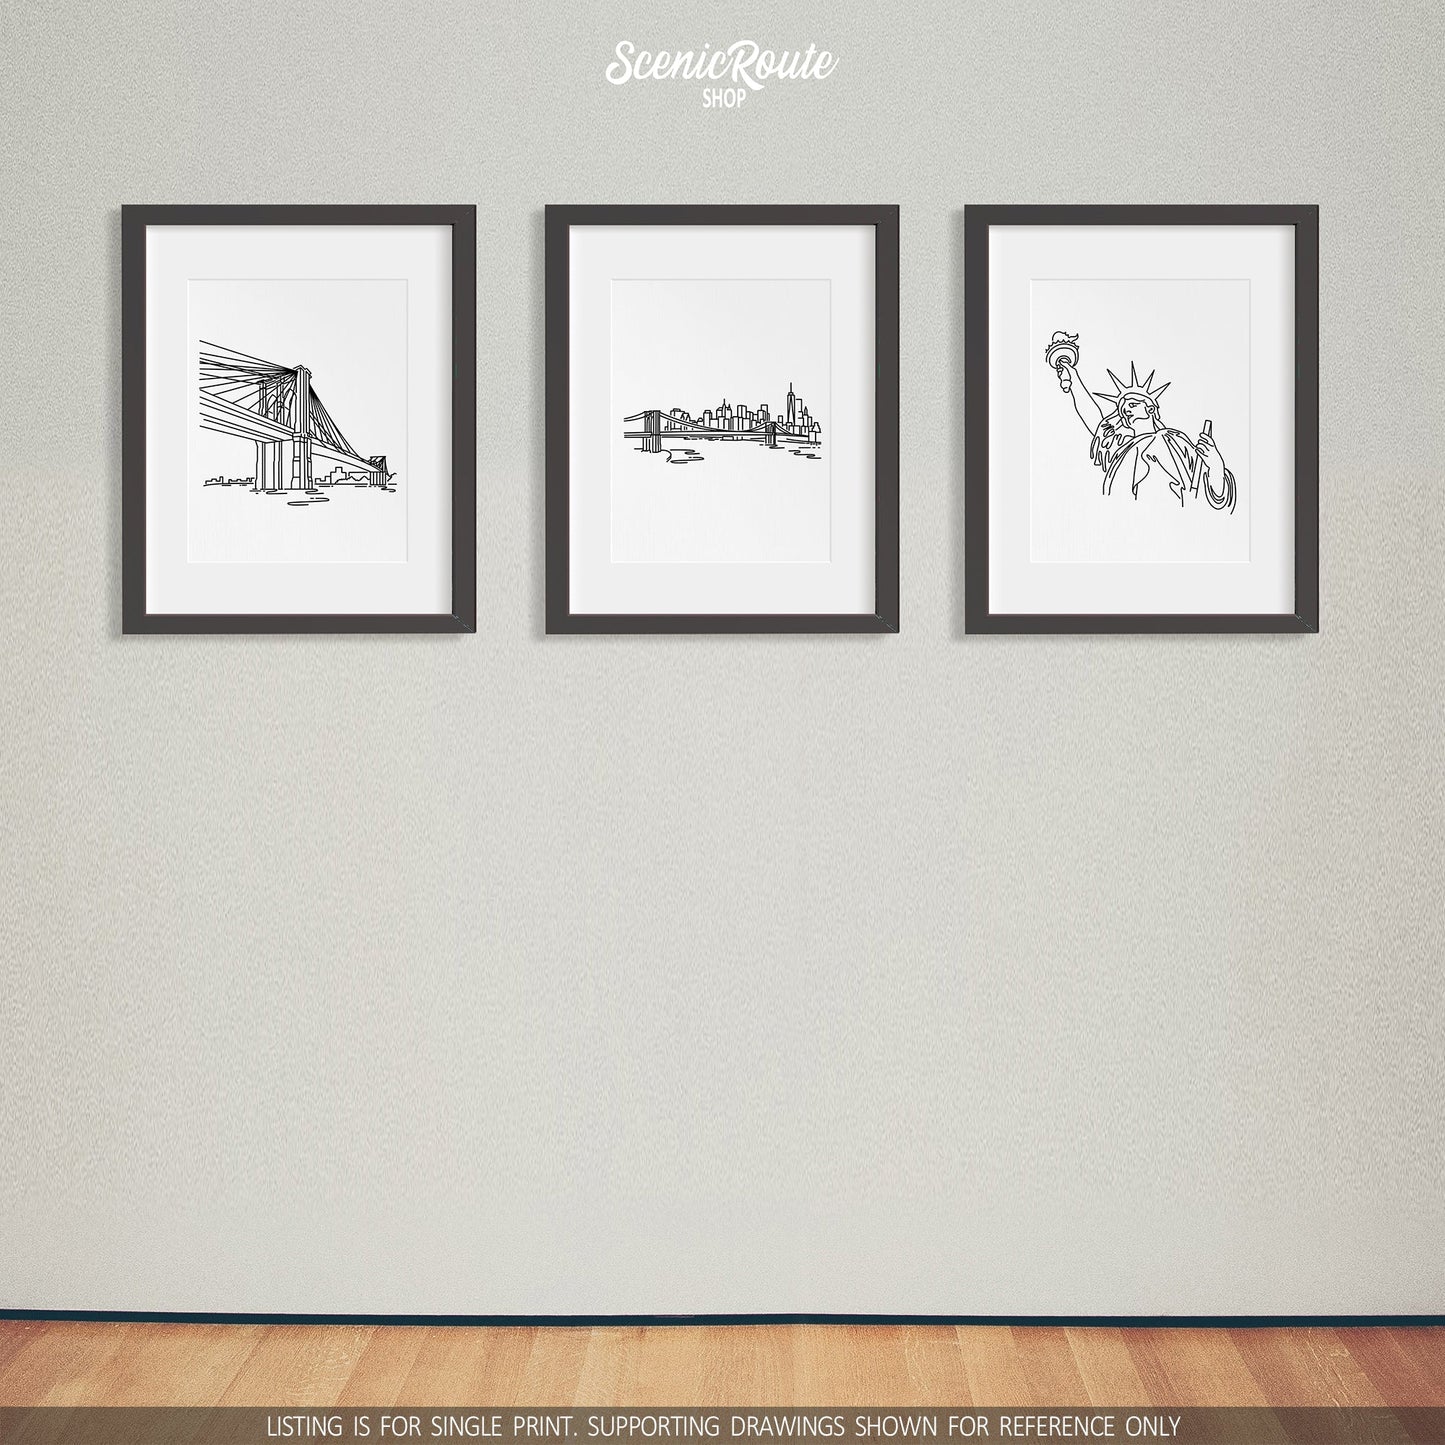 A group of three framed drawings on a gray wall. The line art drawings include the Brooklyn Bridge, New York City Skyline, and Statue of Liberty